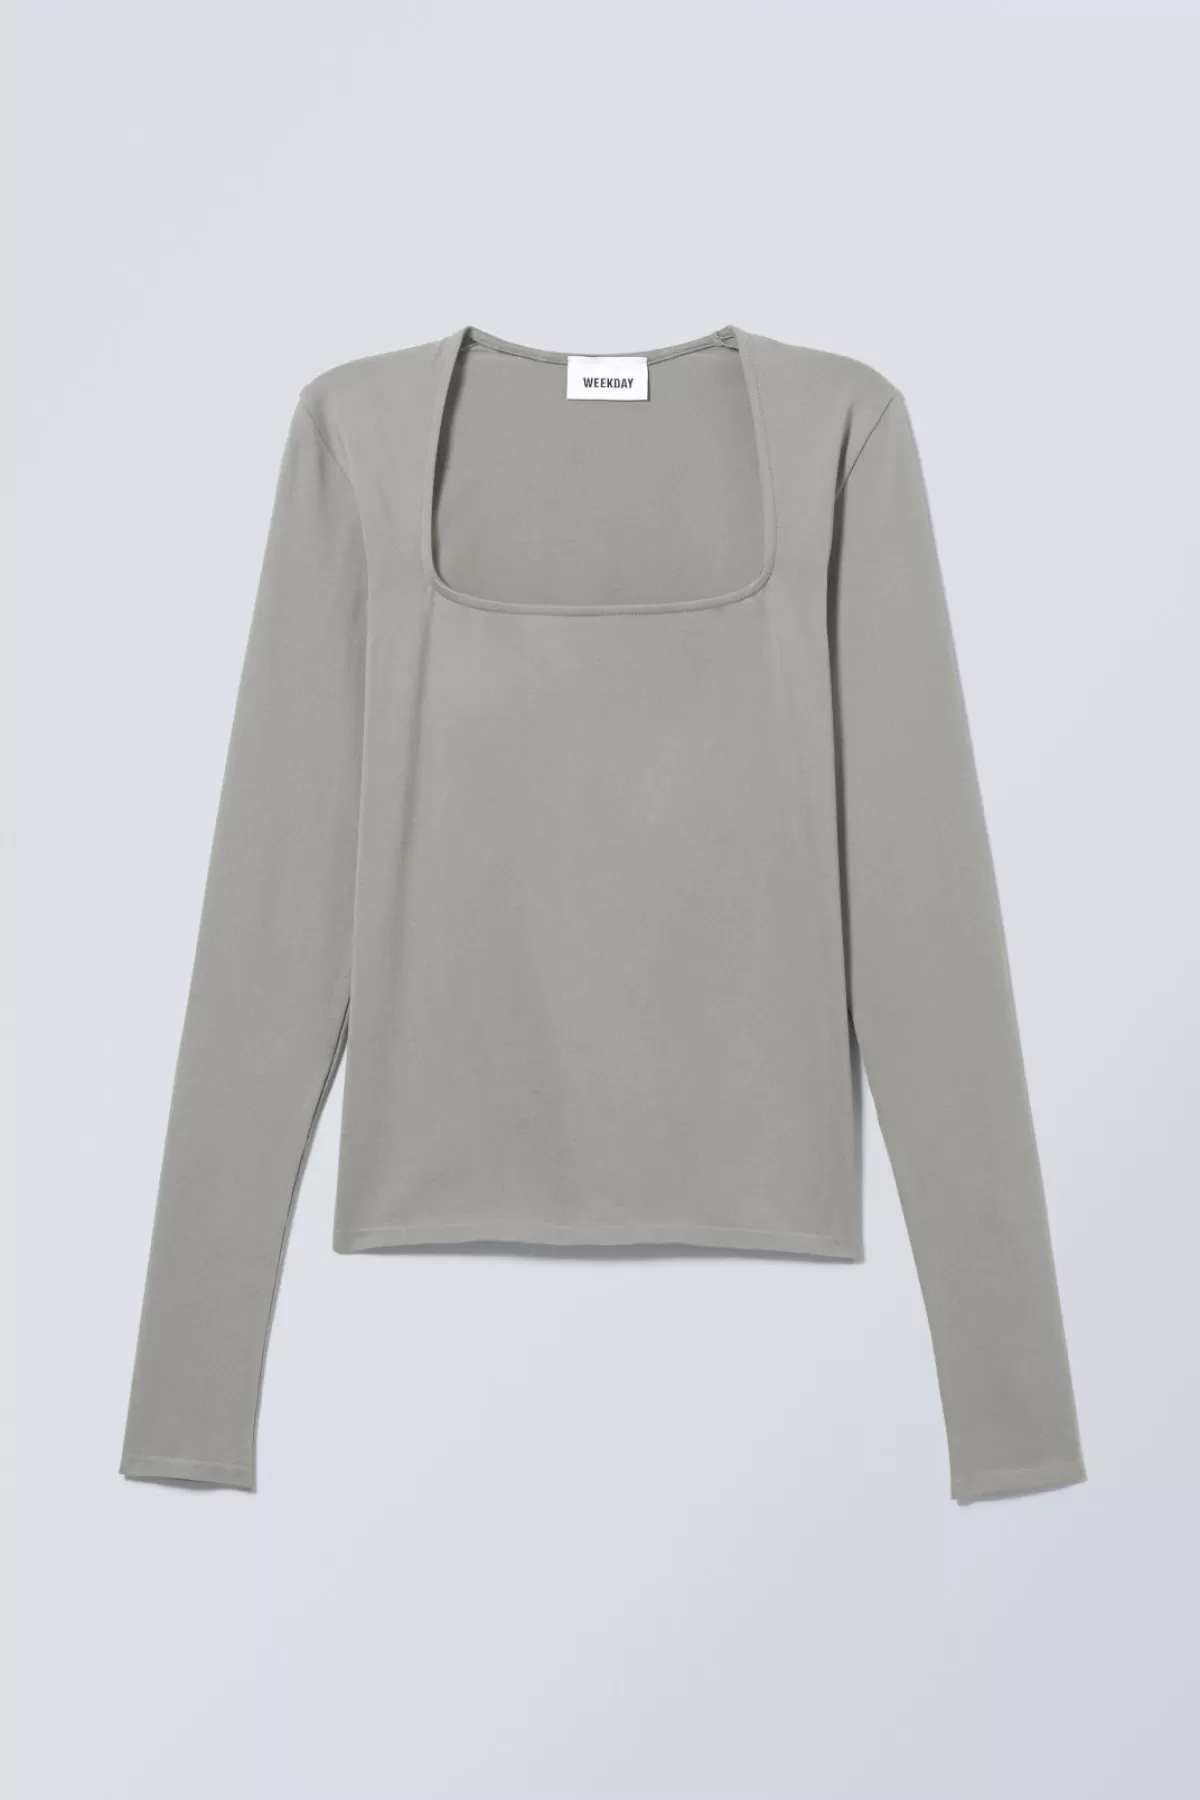 Weekday Square Neck Longsleeve Top Dusty Grey Hot